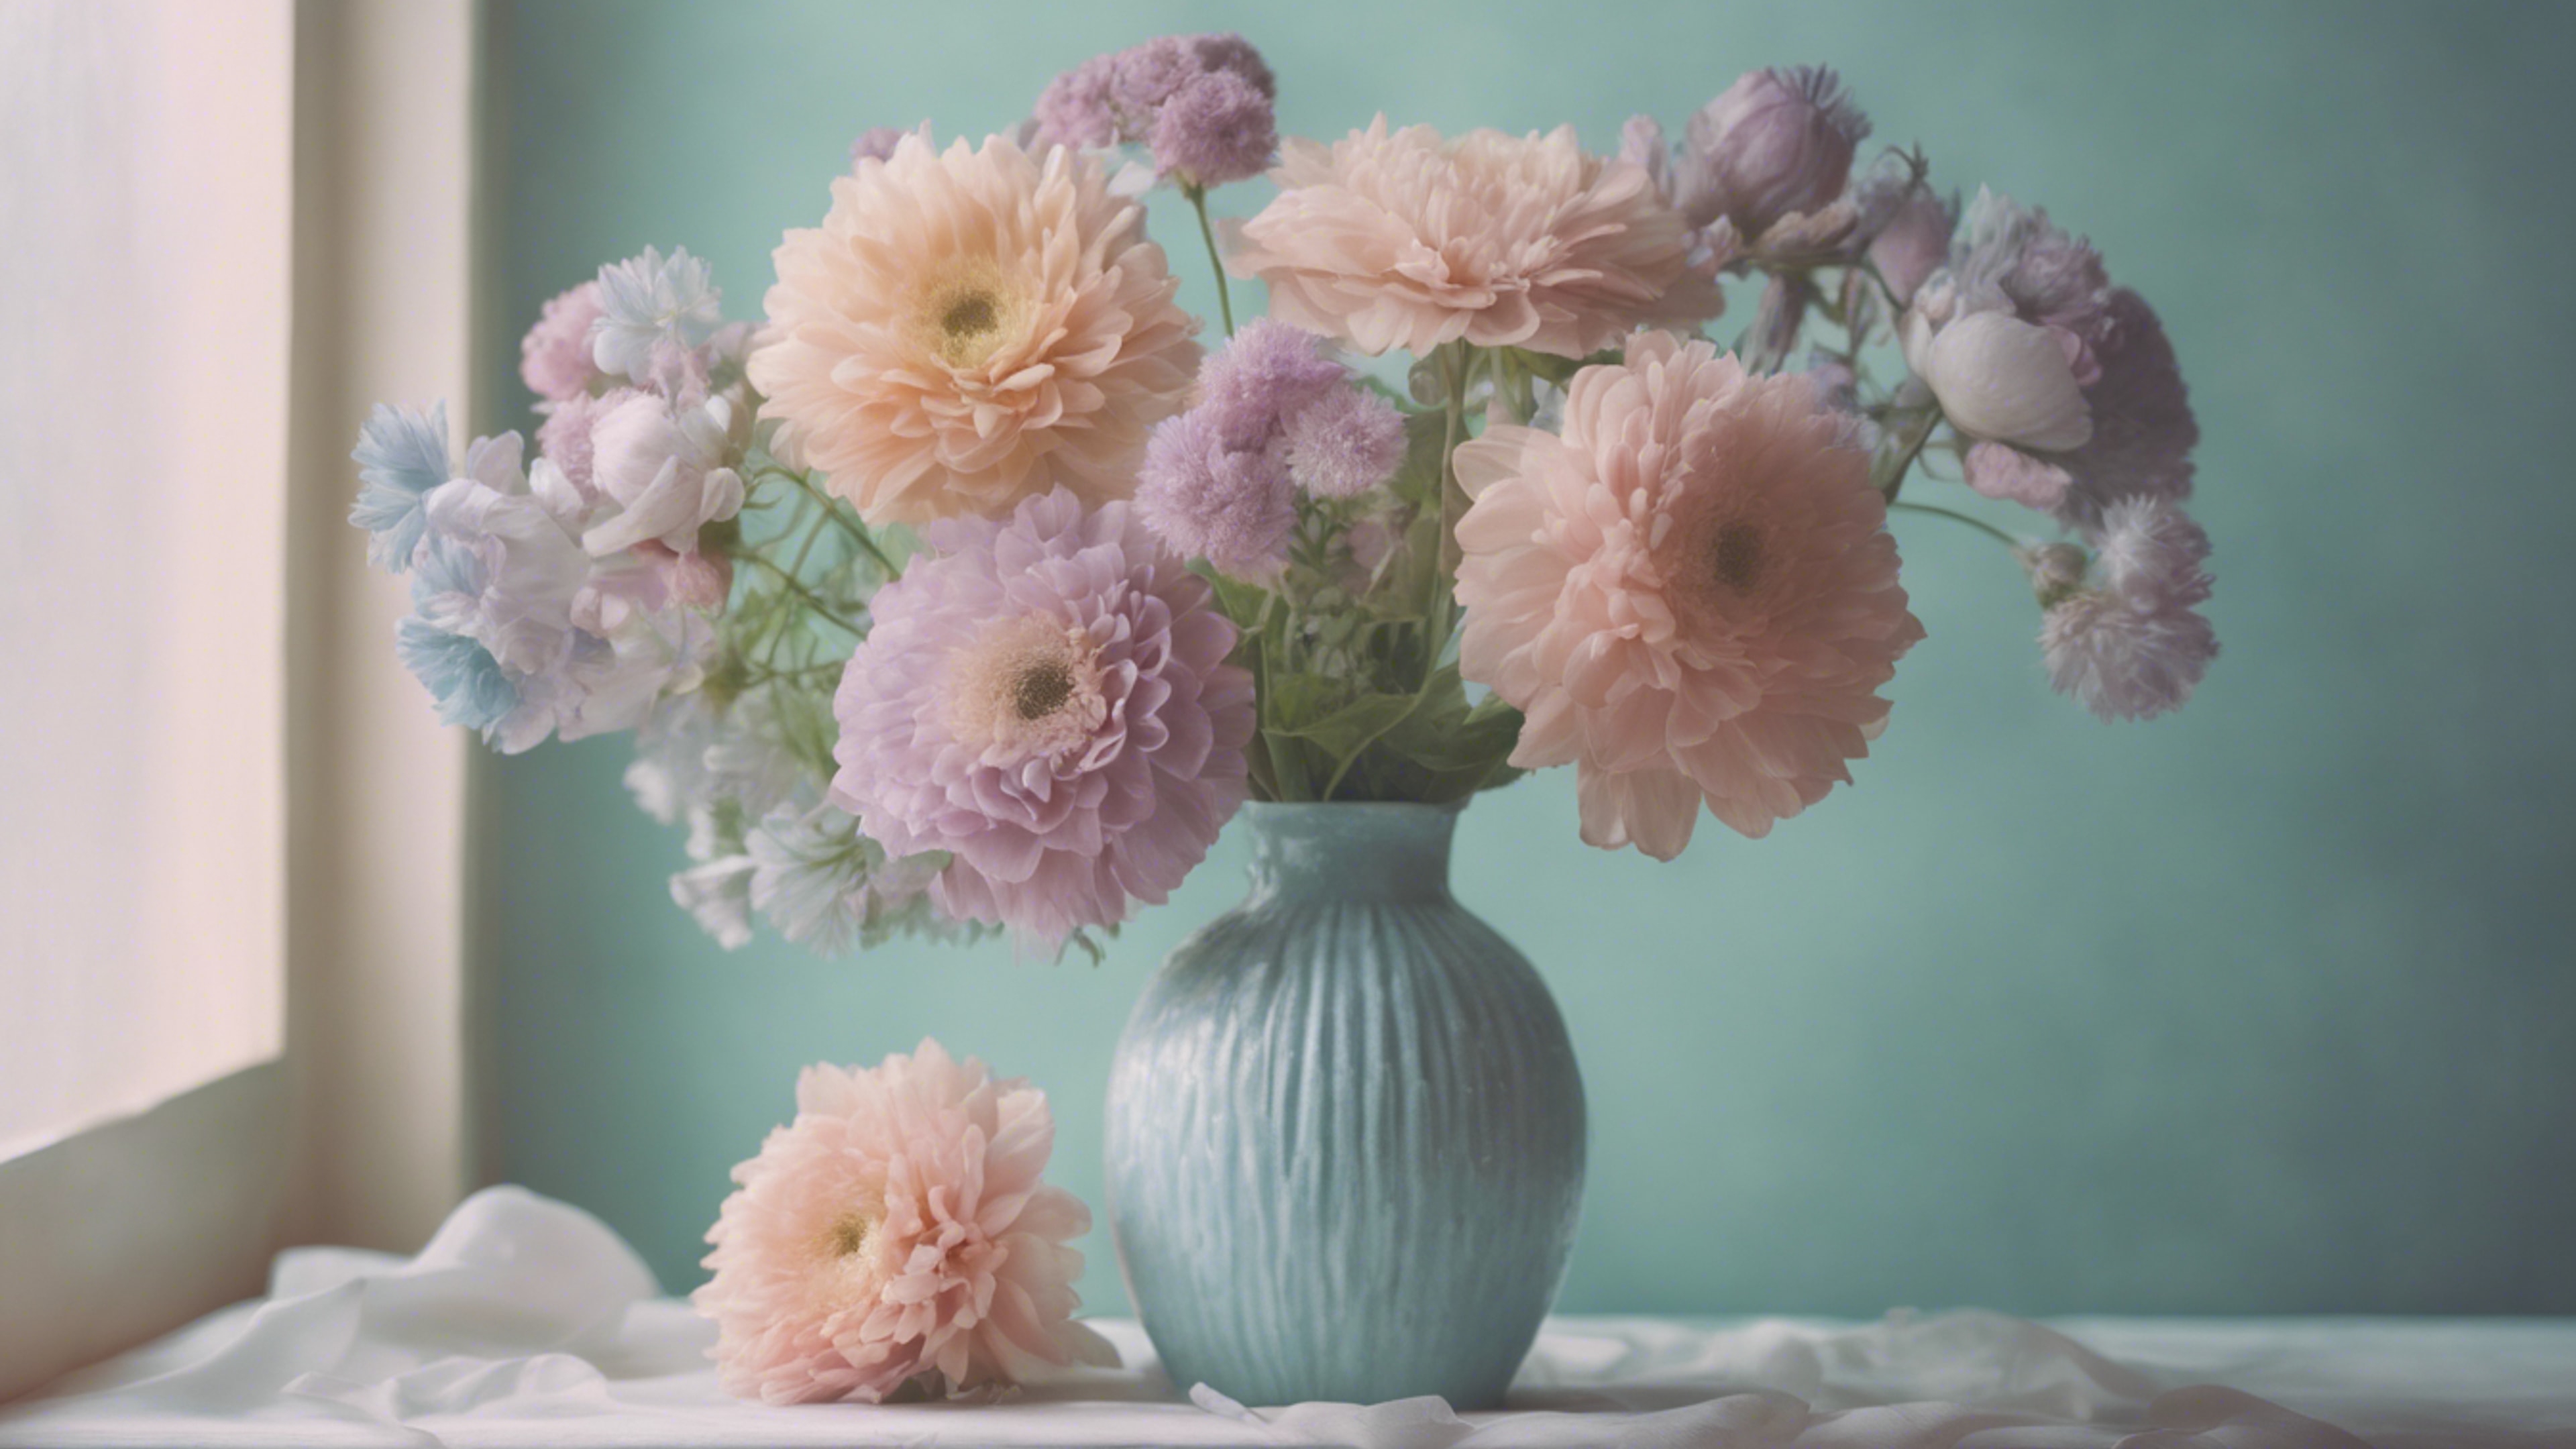 A pastel toned still-life painting featuring cool pastel colored flowers in a vase. 牆紙[6e1327f815a34bc2b32b]